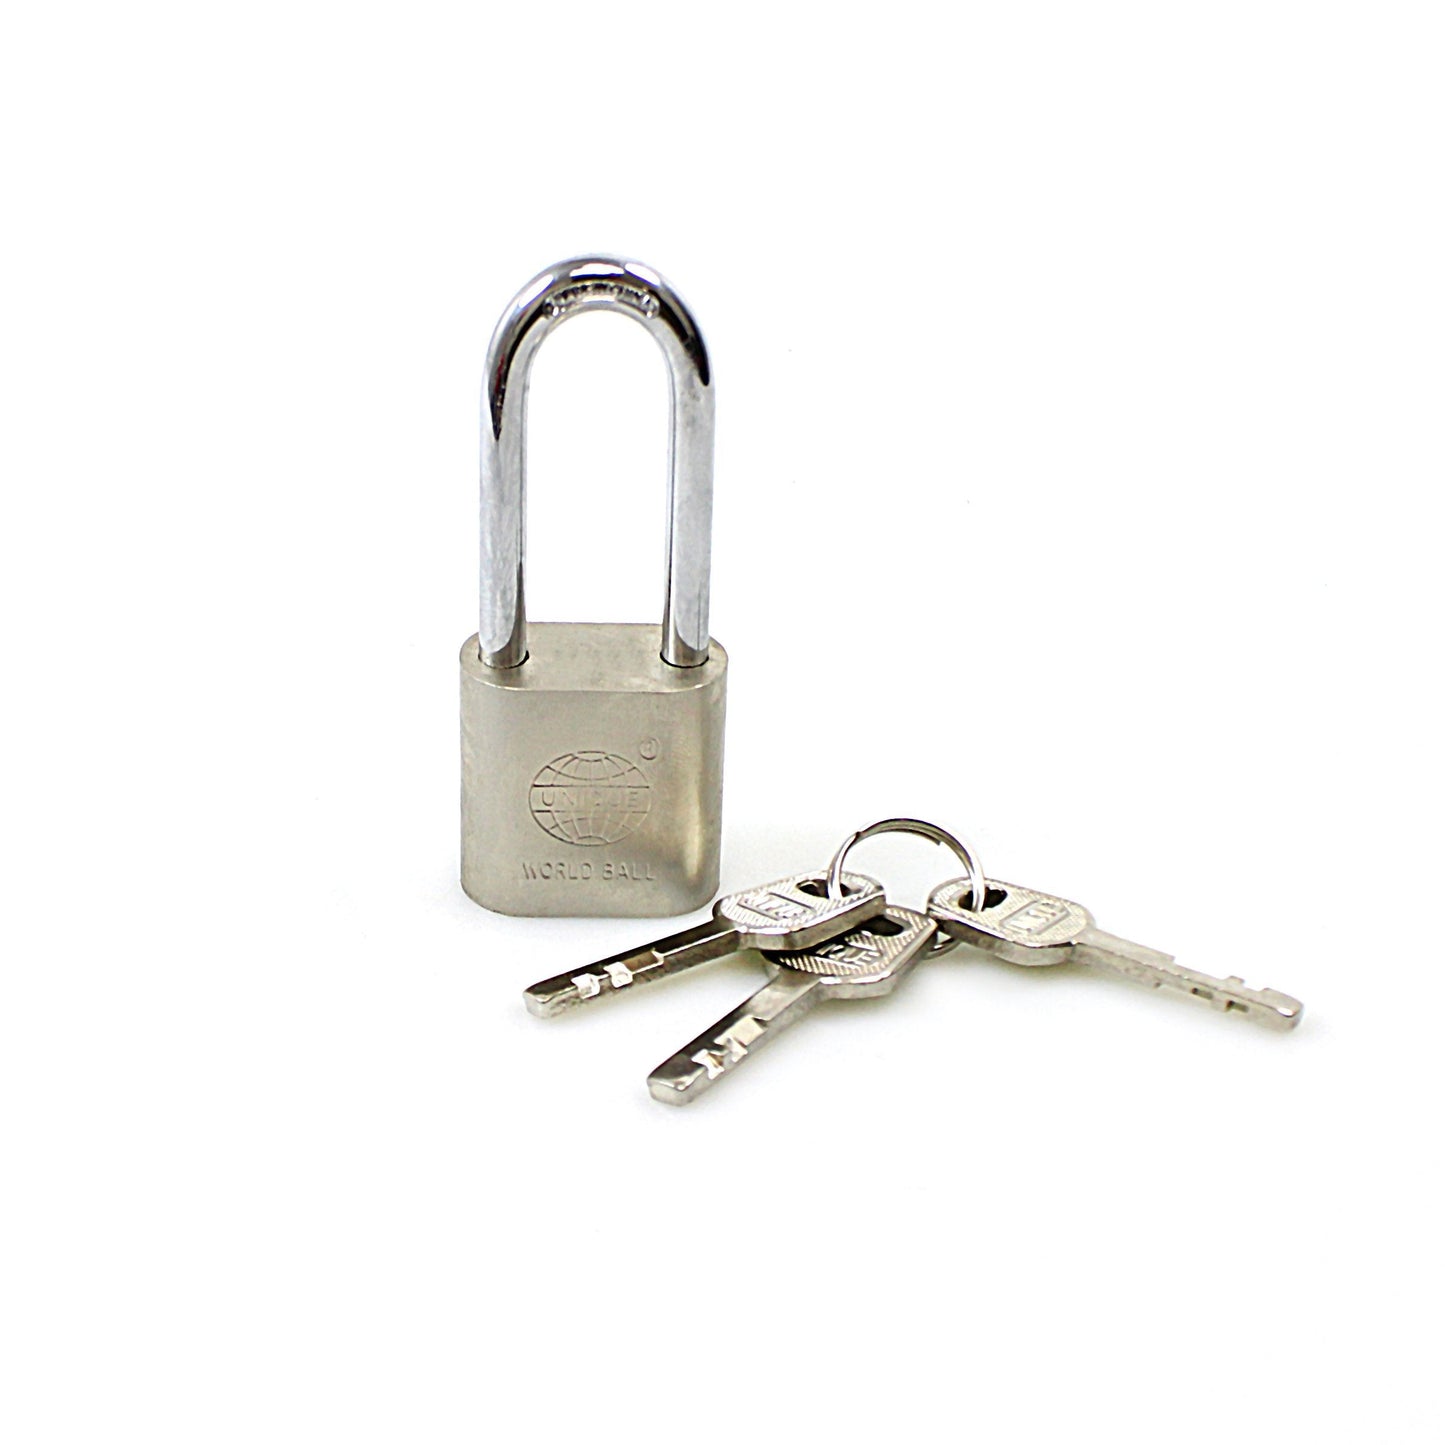 World Ball Lock Top Security Lock 3 Keys 30mm 0248 (Large Letter Rate)